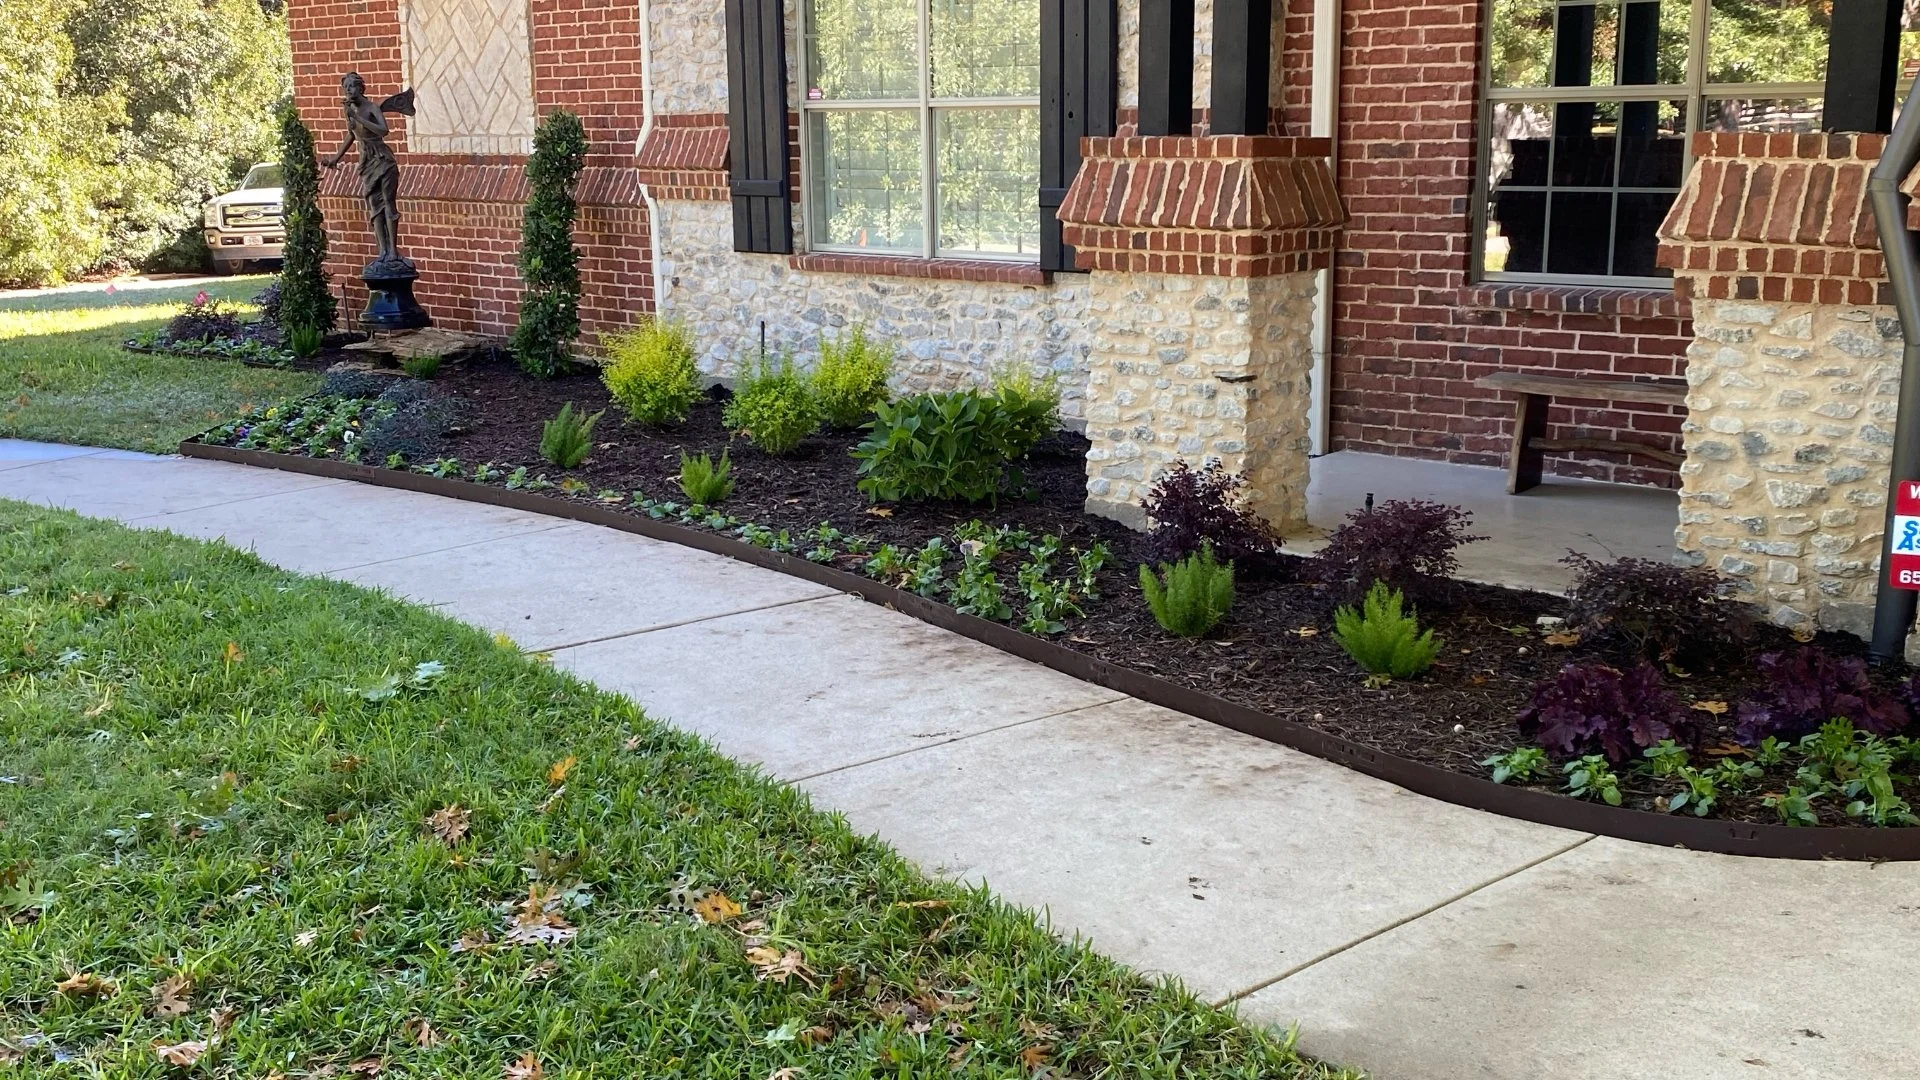 4 Steps to Completely Transform Your Landscape Beds & Your Home's Curb Appeal